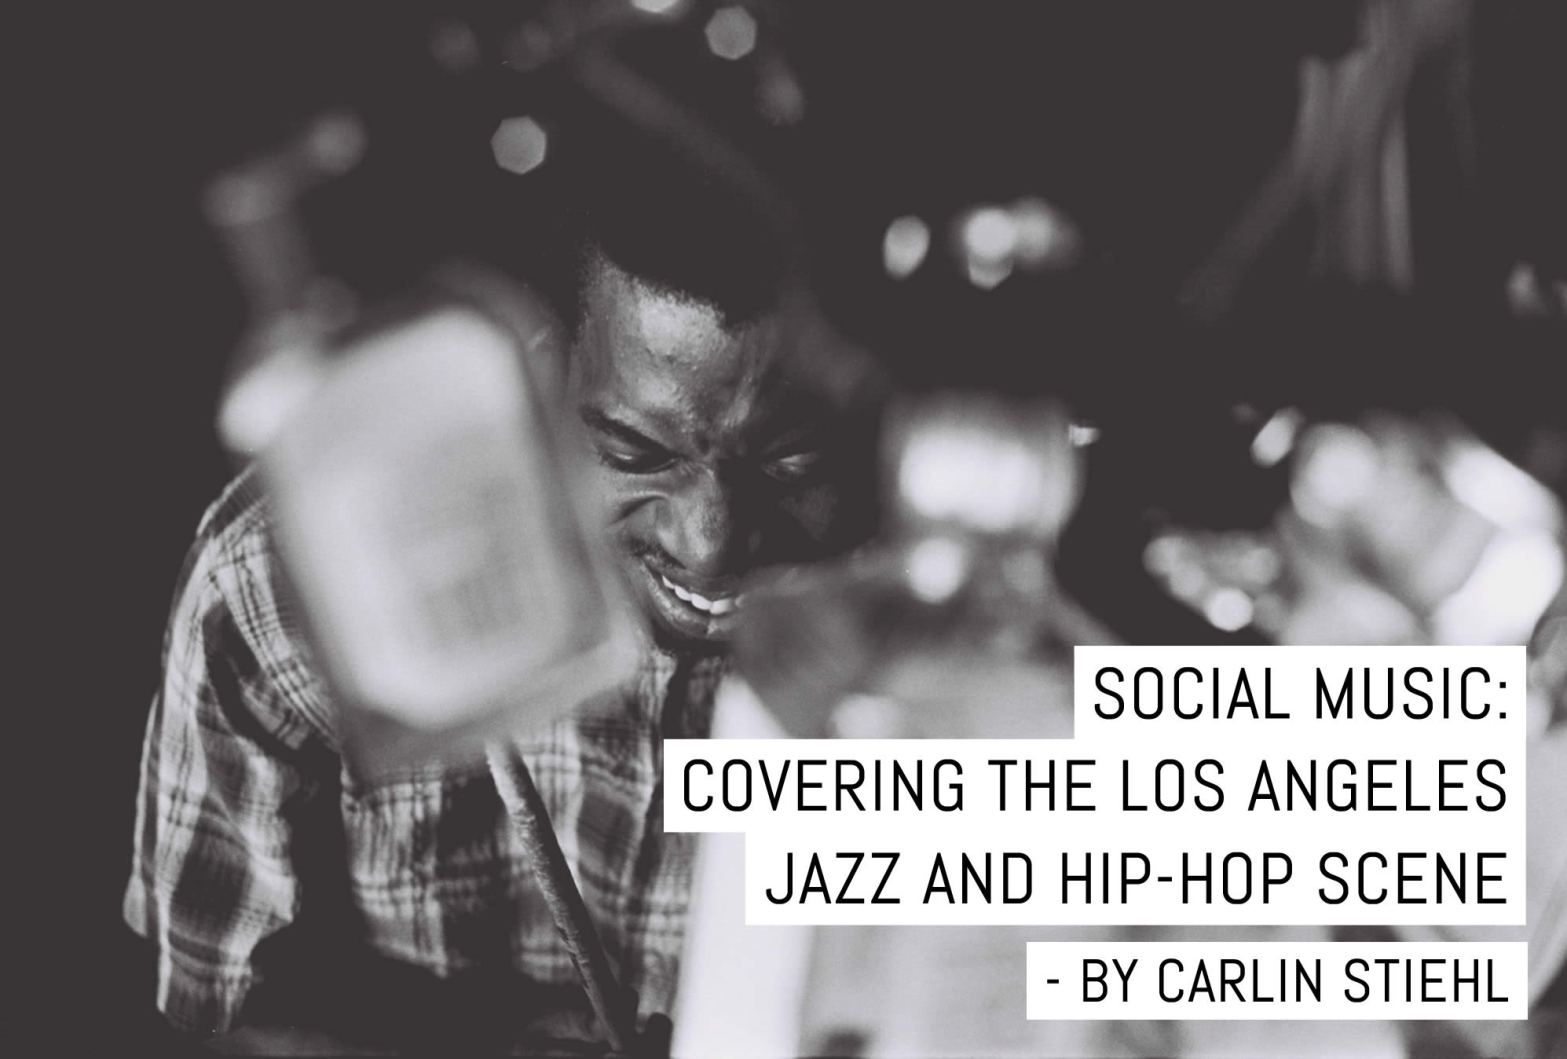 Social Music: Covering the Los Angeles jazz and hip-hop scene